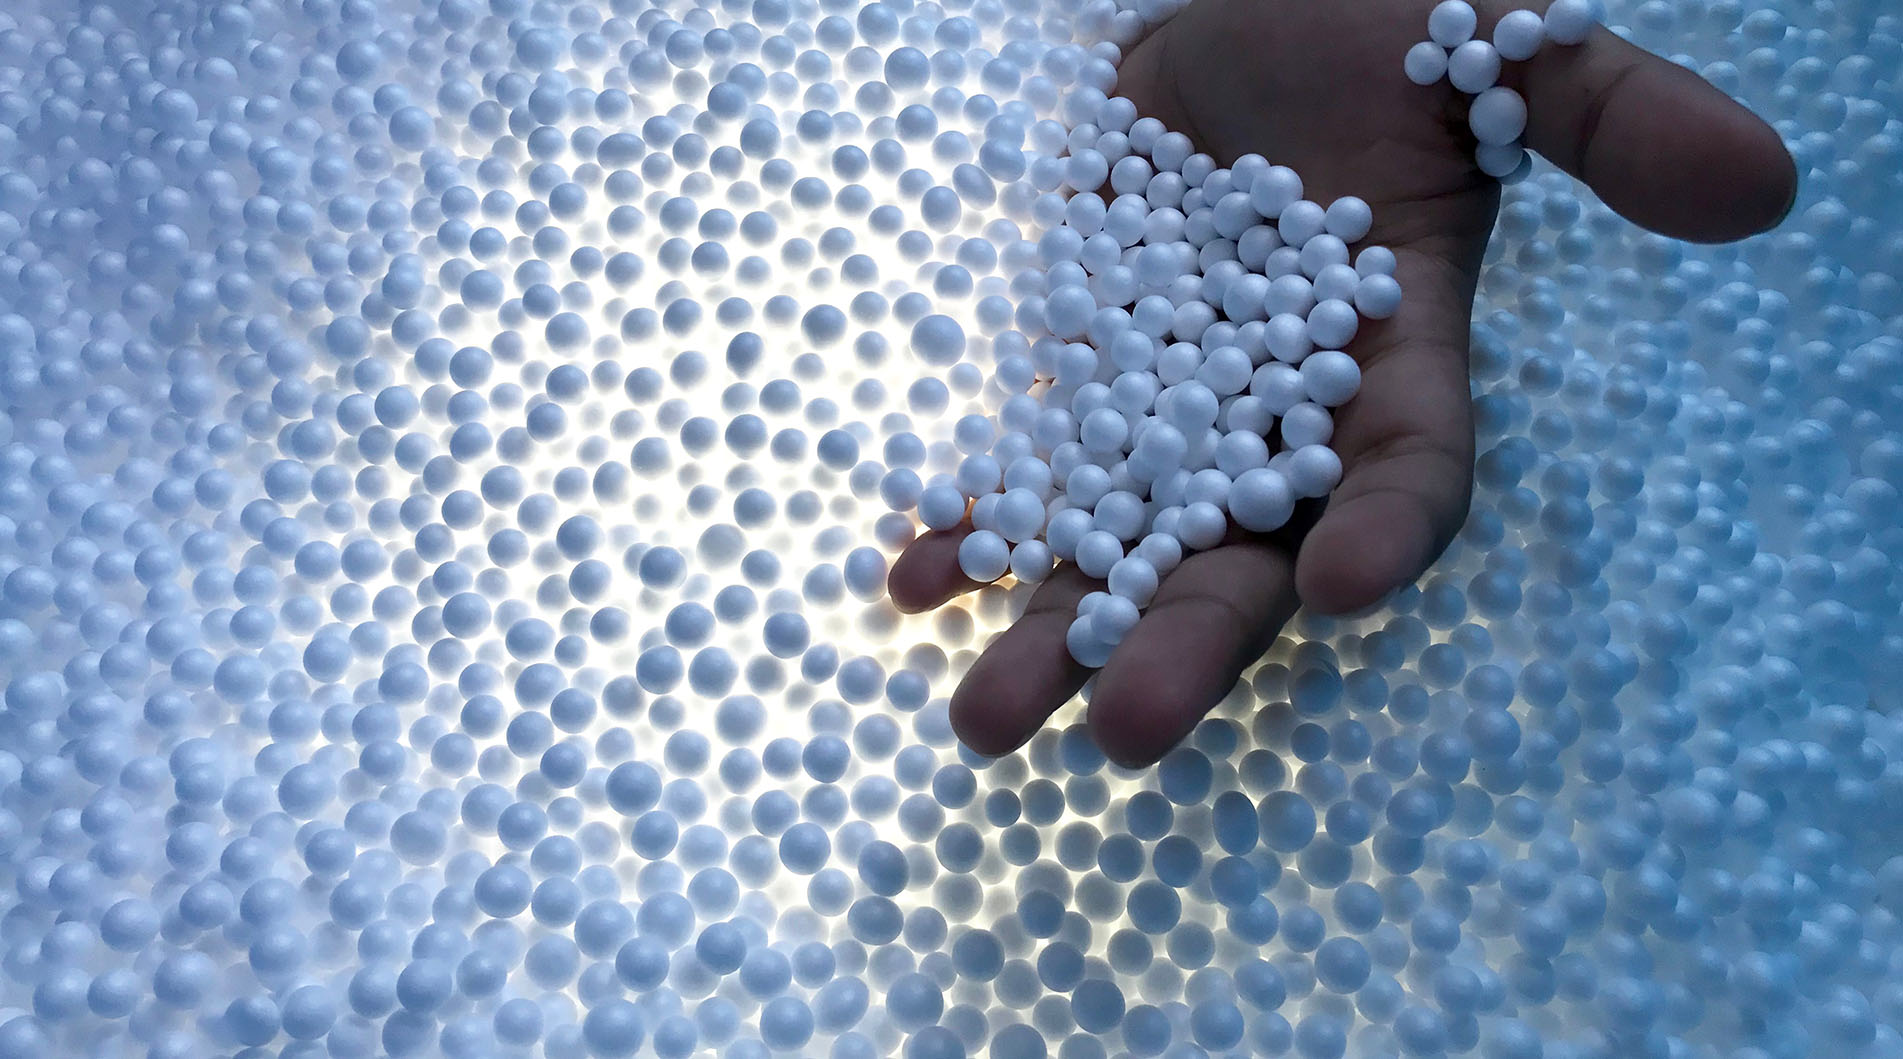 Image showing a hand in a pile of polystyrene beads